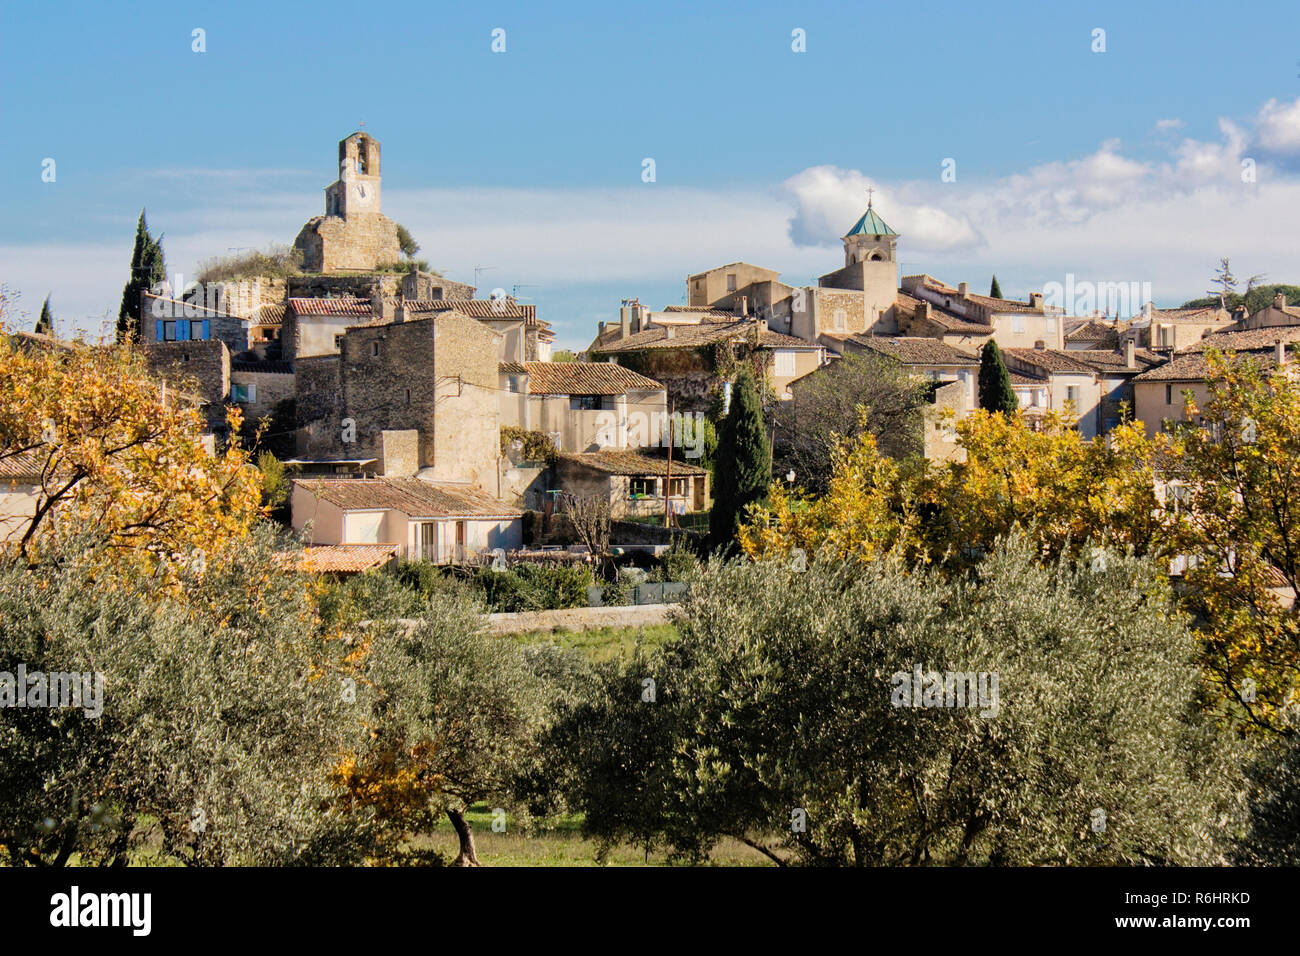 View of an old village in the Luberon region, southern France. Old church and houses with trees and sunshine. Stock Photo